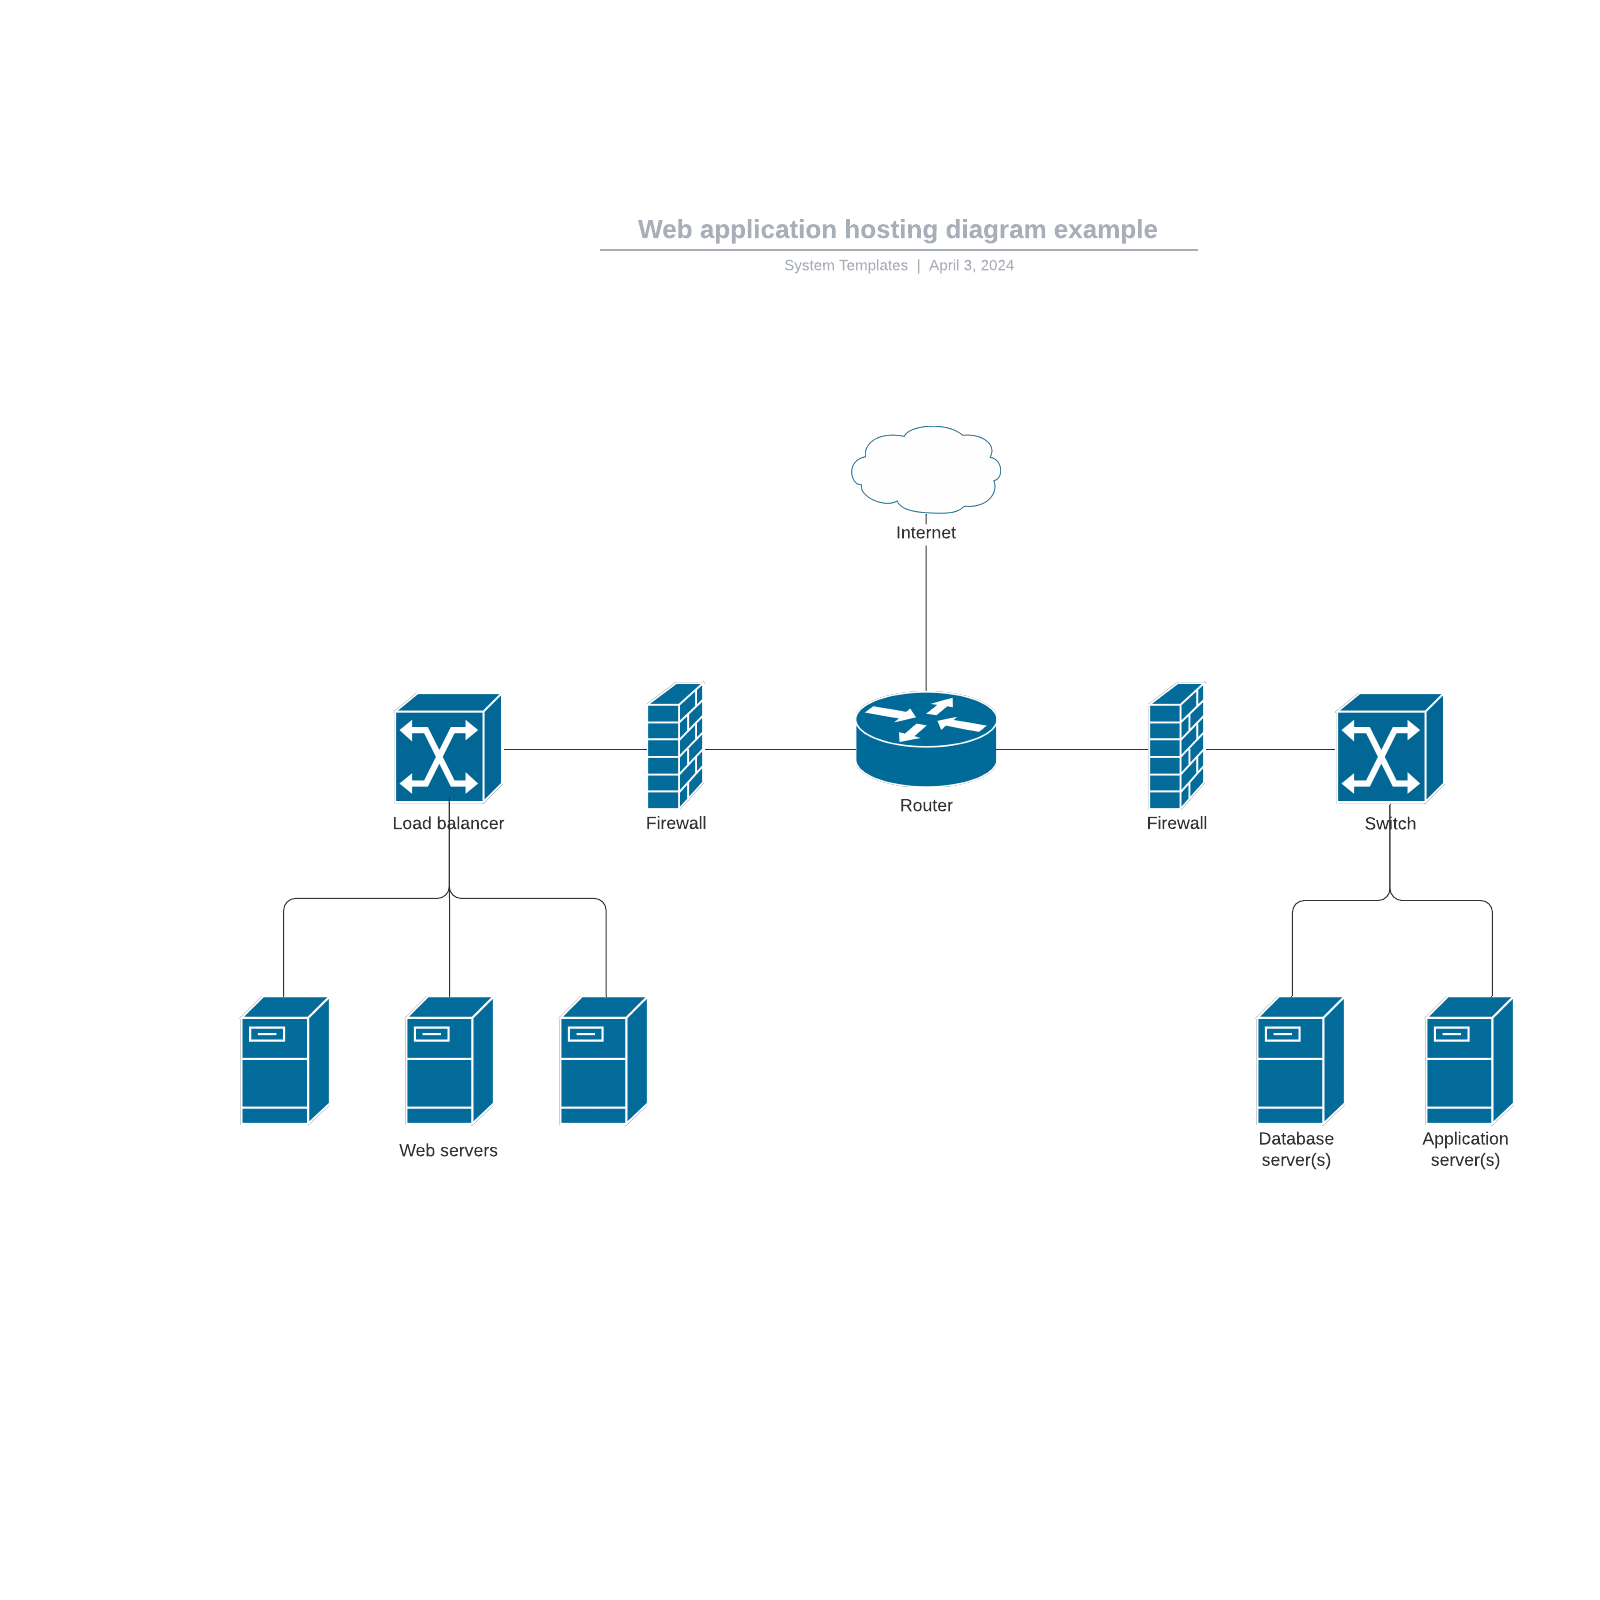 Web application hosting diagram example example